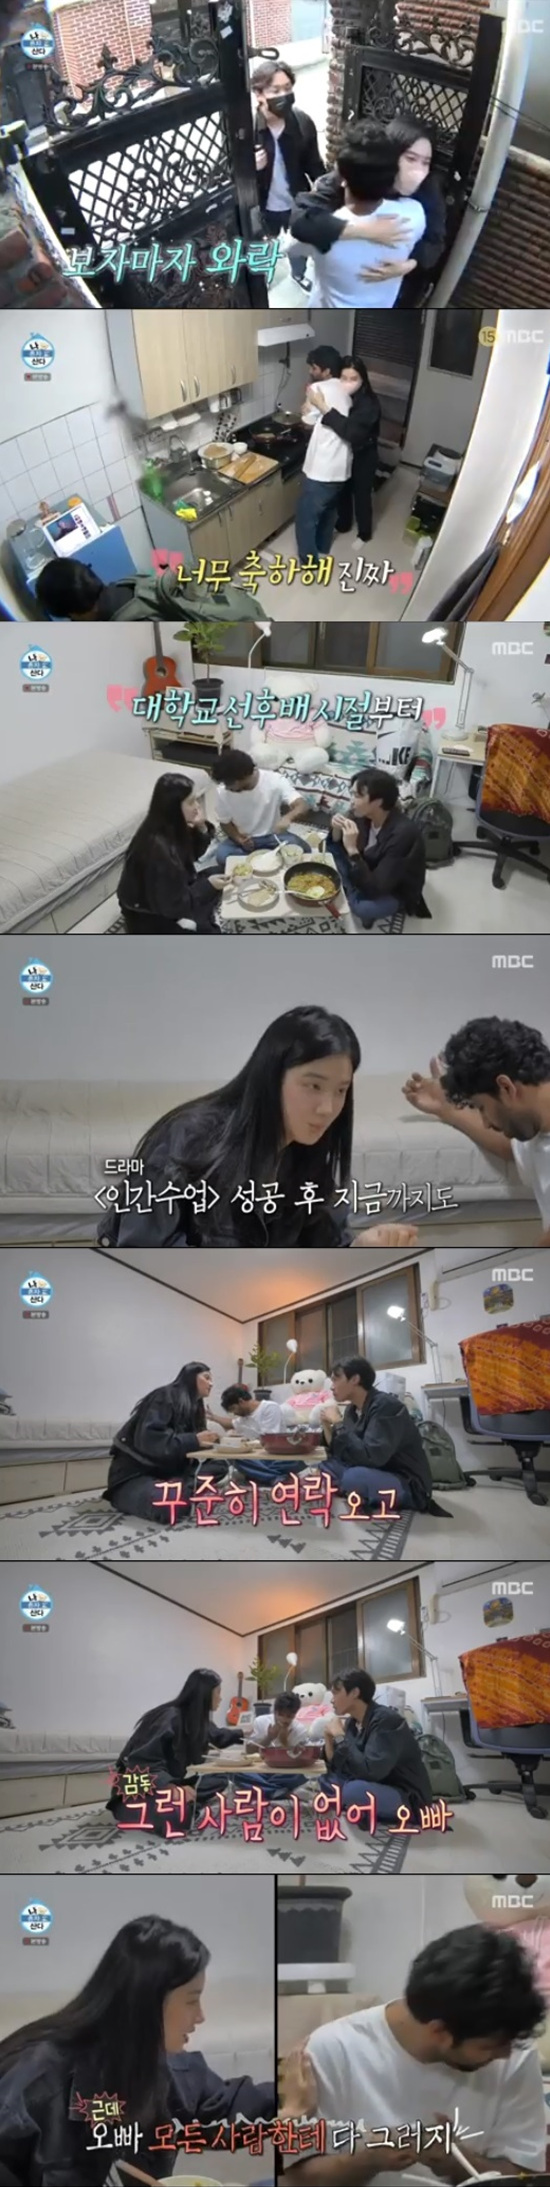 On MBC I Live Alone broadcast on the 22nd, Park Joo-hyun was looking for Anupams house.On this day, Anupam invited Friends, a junior of Han Ye-jong, to his home; Park Joo-hyun, a junior and friend of Anupam, arrived with Kim Pyung-jo.Park Joo-hyun was happy to see Anupam as he came out to open the door and hugged Anupam.Im so happy, Im so happy, Park Joo-hyun said, referring to Anupams well-known work as a squid game.Park Joo-hyun showed his sincere congratulations on Anupam, saying he was impressive even after seeing the Squid Game Goods in Anupams house.Park Joo-hyun tasted the chicken curry made by Anupam and admired it as I do my brother. I came to the school for a long time and I thought a lot about old days.I want to keep living next to my brothers school. Park Joo-hyun told me that Kim Pyeong-jo cried when he saw squid game .Id have been so clunky, this is how motivated, Park Joo-hyun said.Park Joo-hyun said of Anupam, I have been in human class since I was in school, and I have been in constant contact since then and have been shouting It is so good to be good.Thank you so much, I always contact you first and there is no such person. Park Joo-hyun wanted to keep on warm and then joked, You do it to everyone, brother? Honestly, its just me. Its all about everyone.Anupam was embarrassed and asked if the Friends were like that.Anupam said he was able to endure a difficult time coming from Korea for the first time thanks to friends like Park Joo-hyun, who said, When I came here, I cried for three months.The reason I was comfortable with my colleagues was because there were many people who said Anupam do this, Do not you understand this? Ill explain it, You can do it.I couldnt have held out without it, he said.Park Joo-hyun has a surprise party with Kim Pyeong-jo as a cake celebrating Anupams success in squid game.Anupam said, I wish these good friends were always next to me, when asked to pray for a cow and turn off the candle.Park Na-rae looked at Anupam, Park Joo-hyun, and Kim Pyeong-jo and said, I met good friends because I am a good person.Park Joo-hyun told Kim Pyeong-jo that he had a shooting the next day, saying, If you open, will you see Model Behavior?Model Behavior? Is it working now if you promote it? He asked Anupam to promote it and said, Lets meet at the top with a bigger one. Photo: MBC Broadcasting Screen